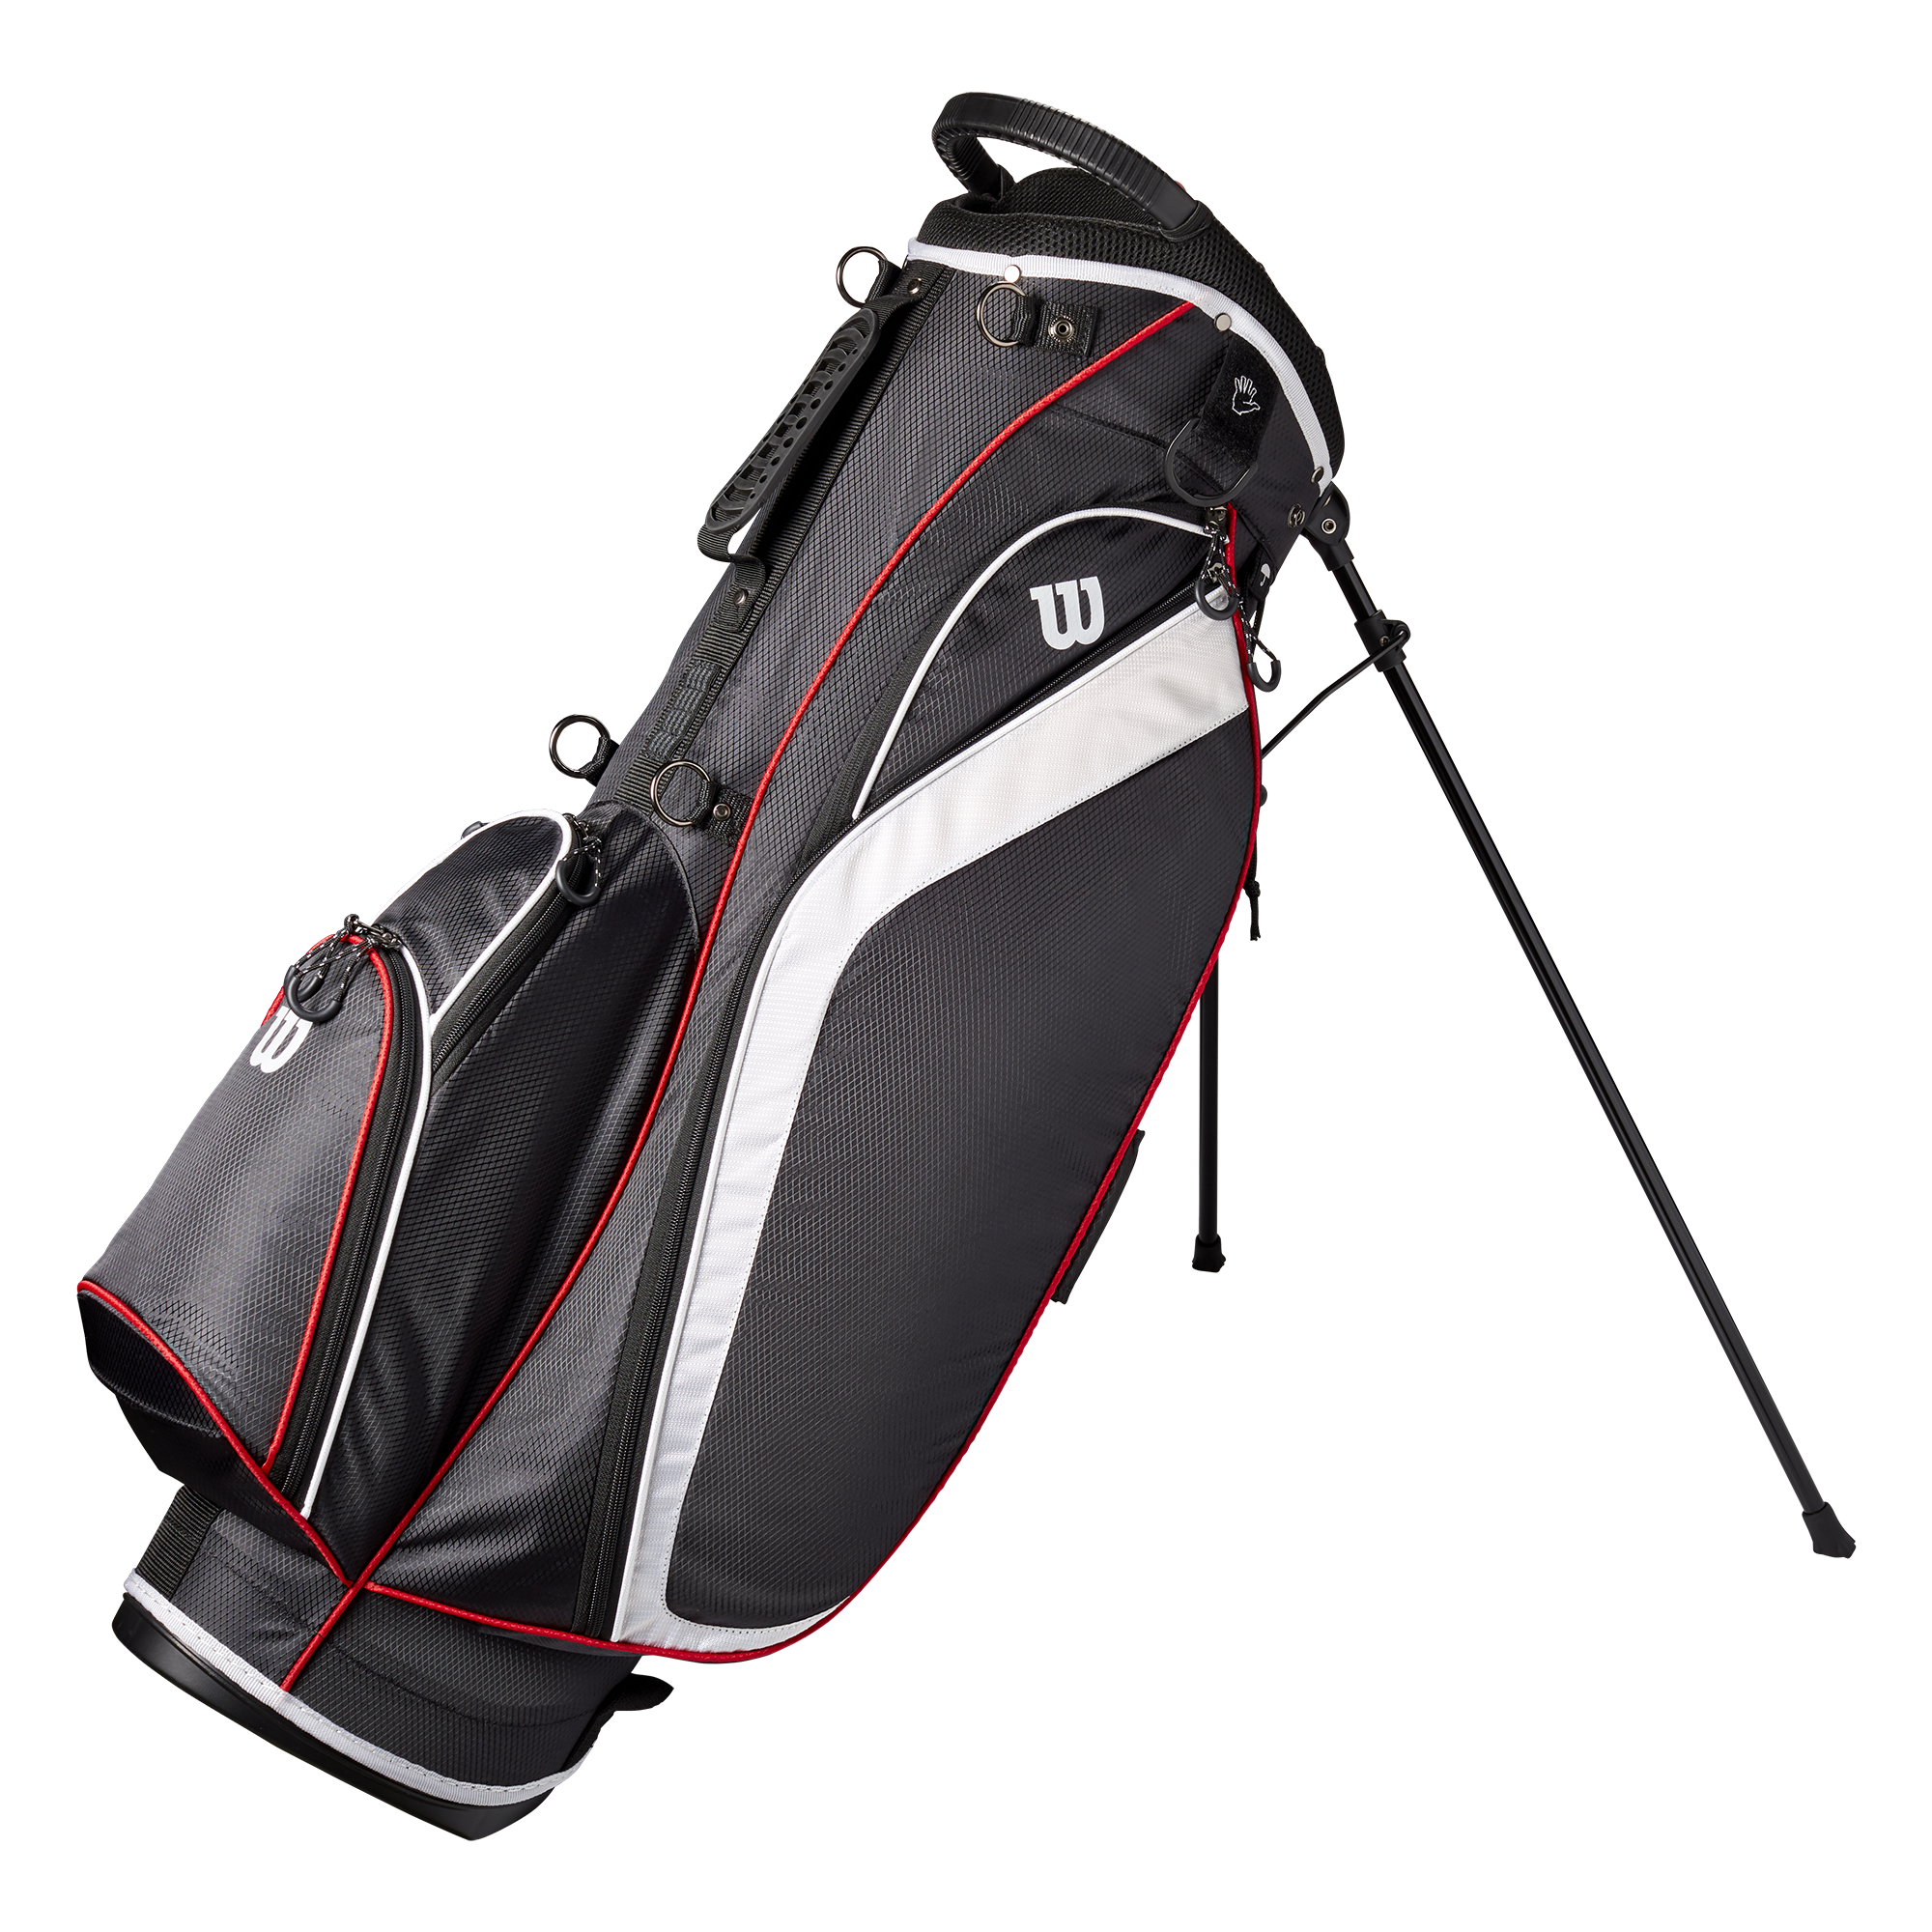 Wilson Stand Golf Bag, 6 Way Divider, Black/White/Red - image 2 of 6